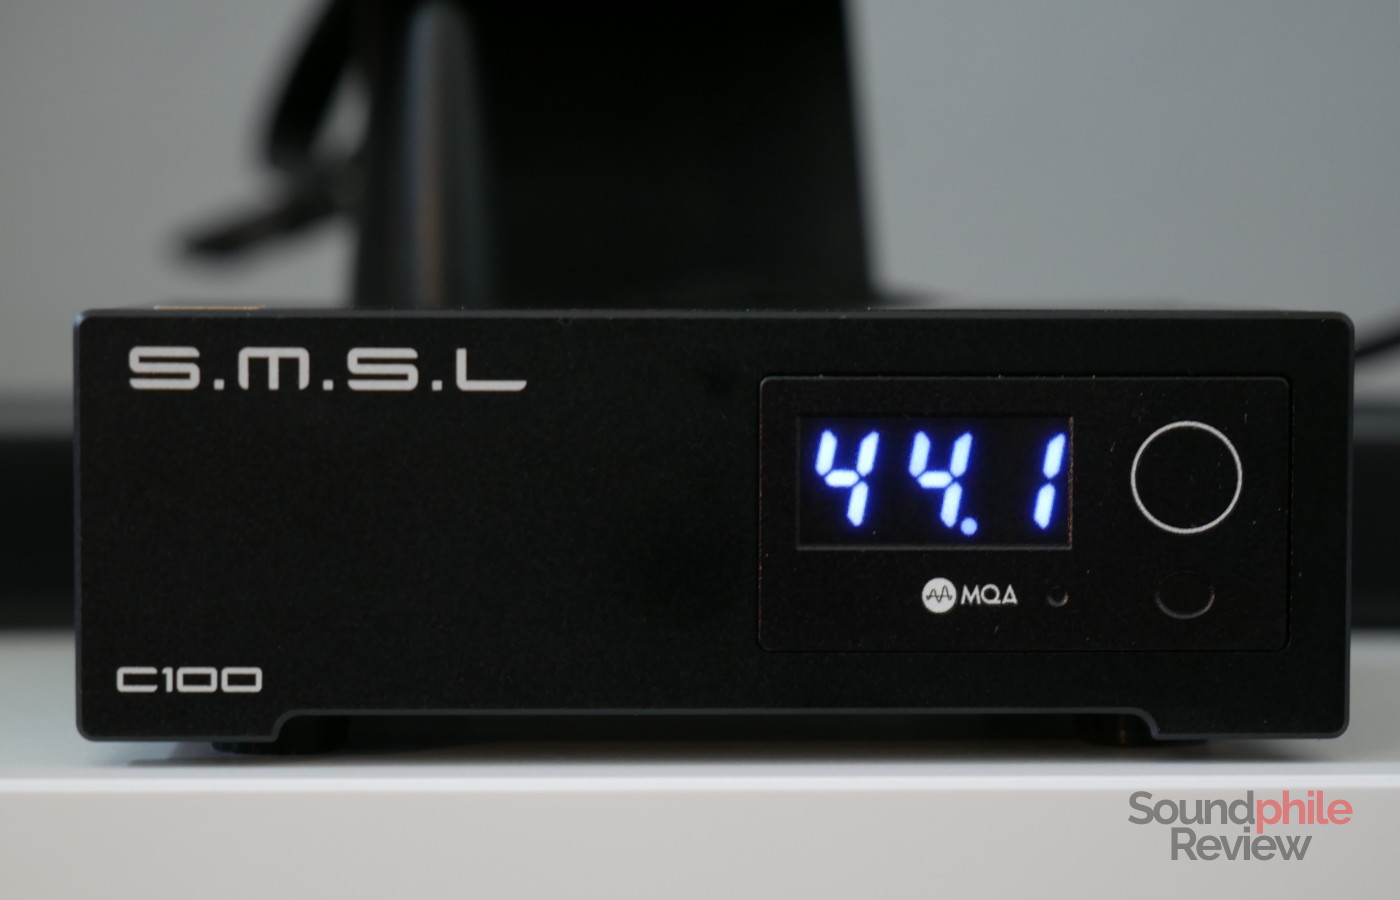 SMSL C100 review has a numeric display on its front